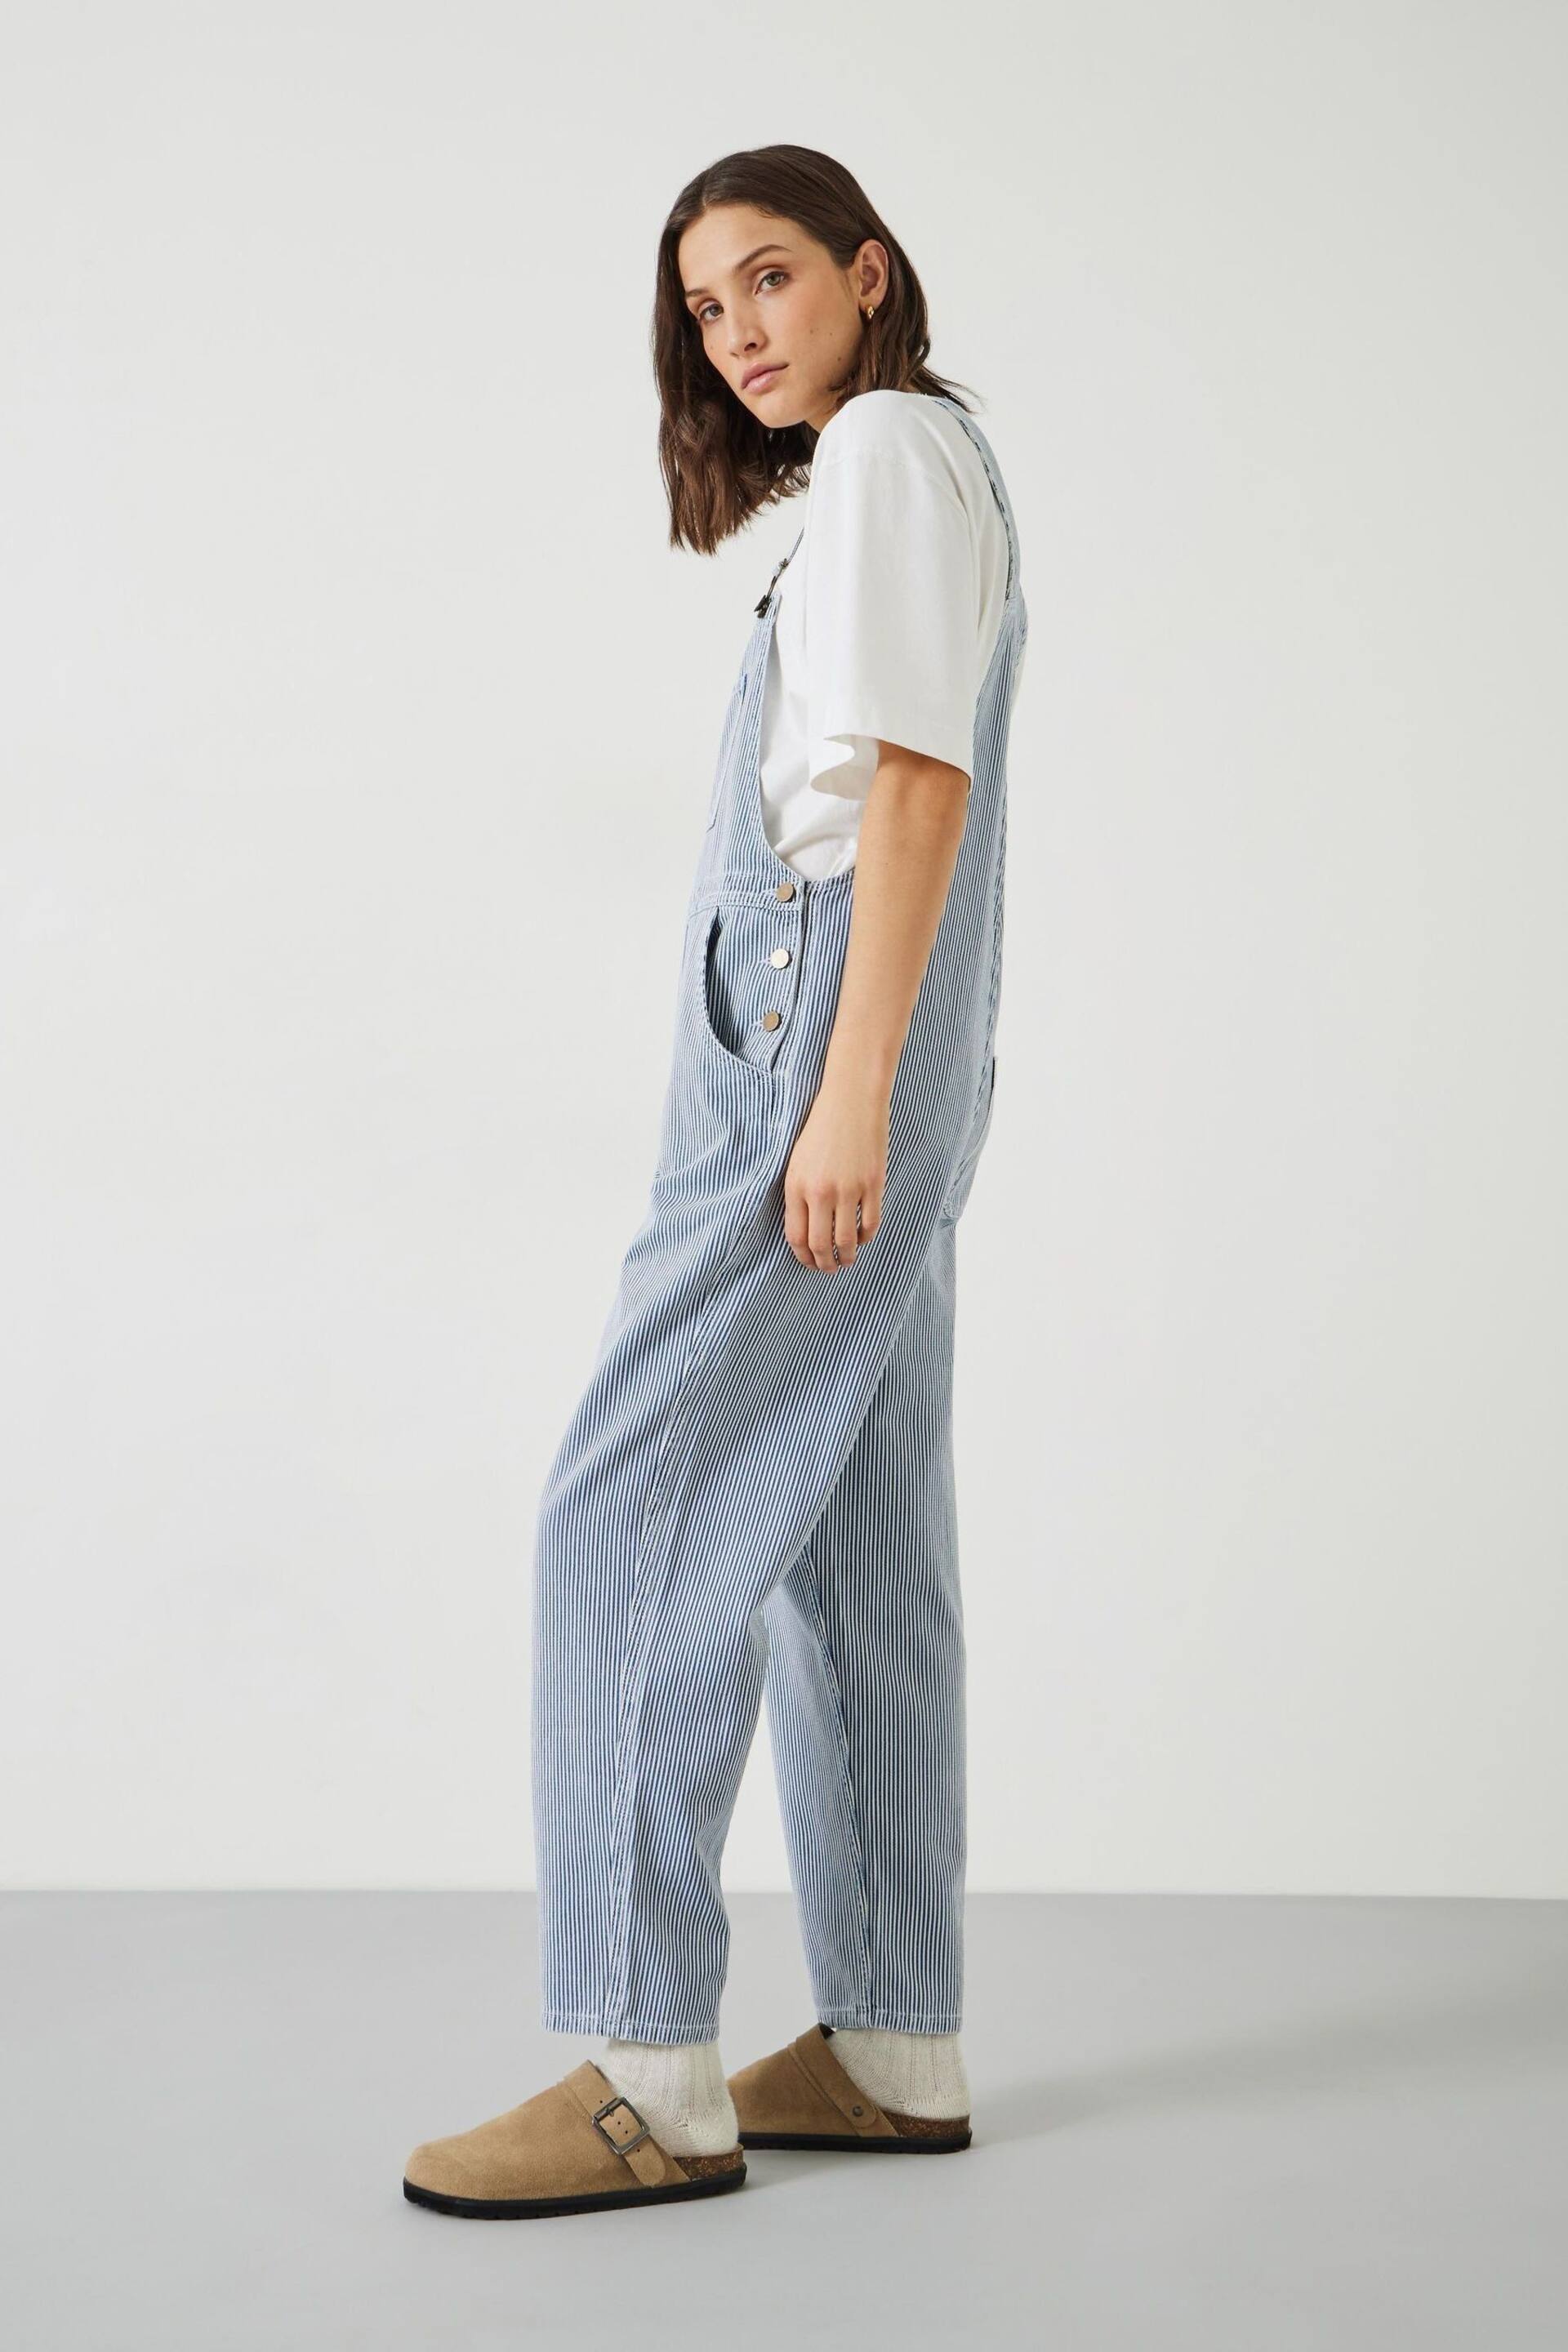 Hush Blue Wilder Striped Dungarees - Image 4 of 5